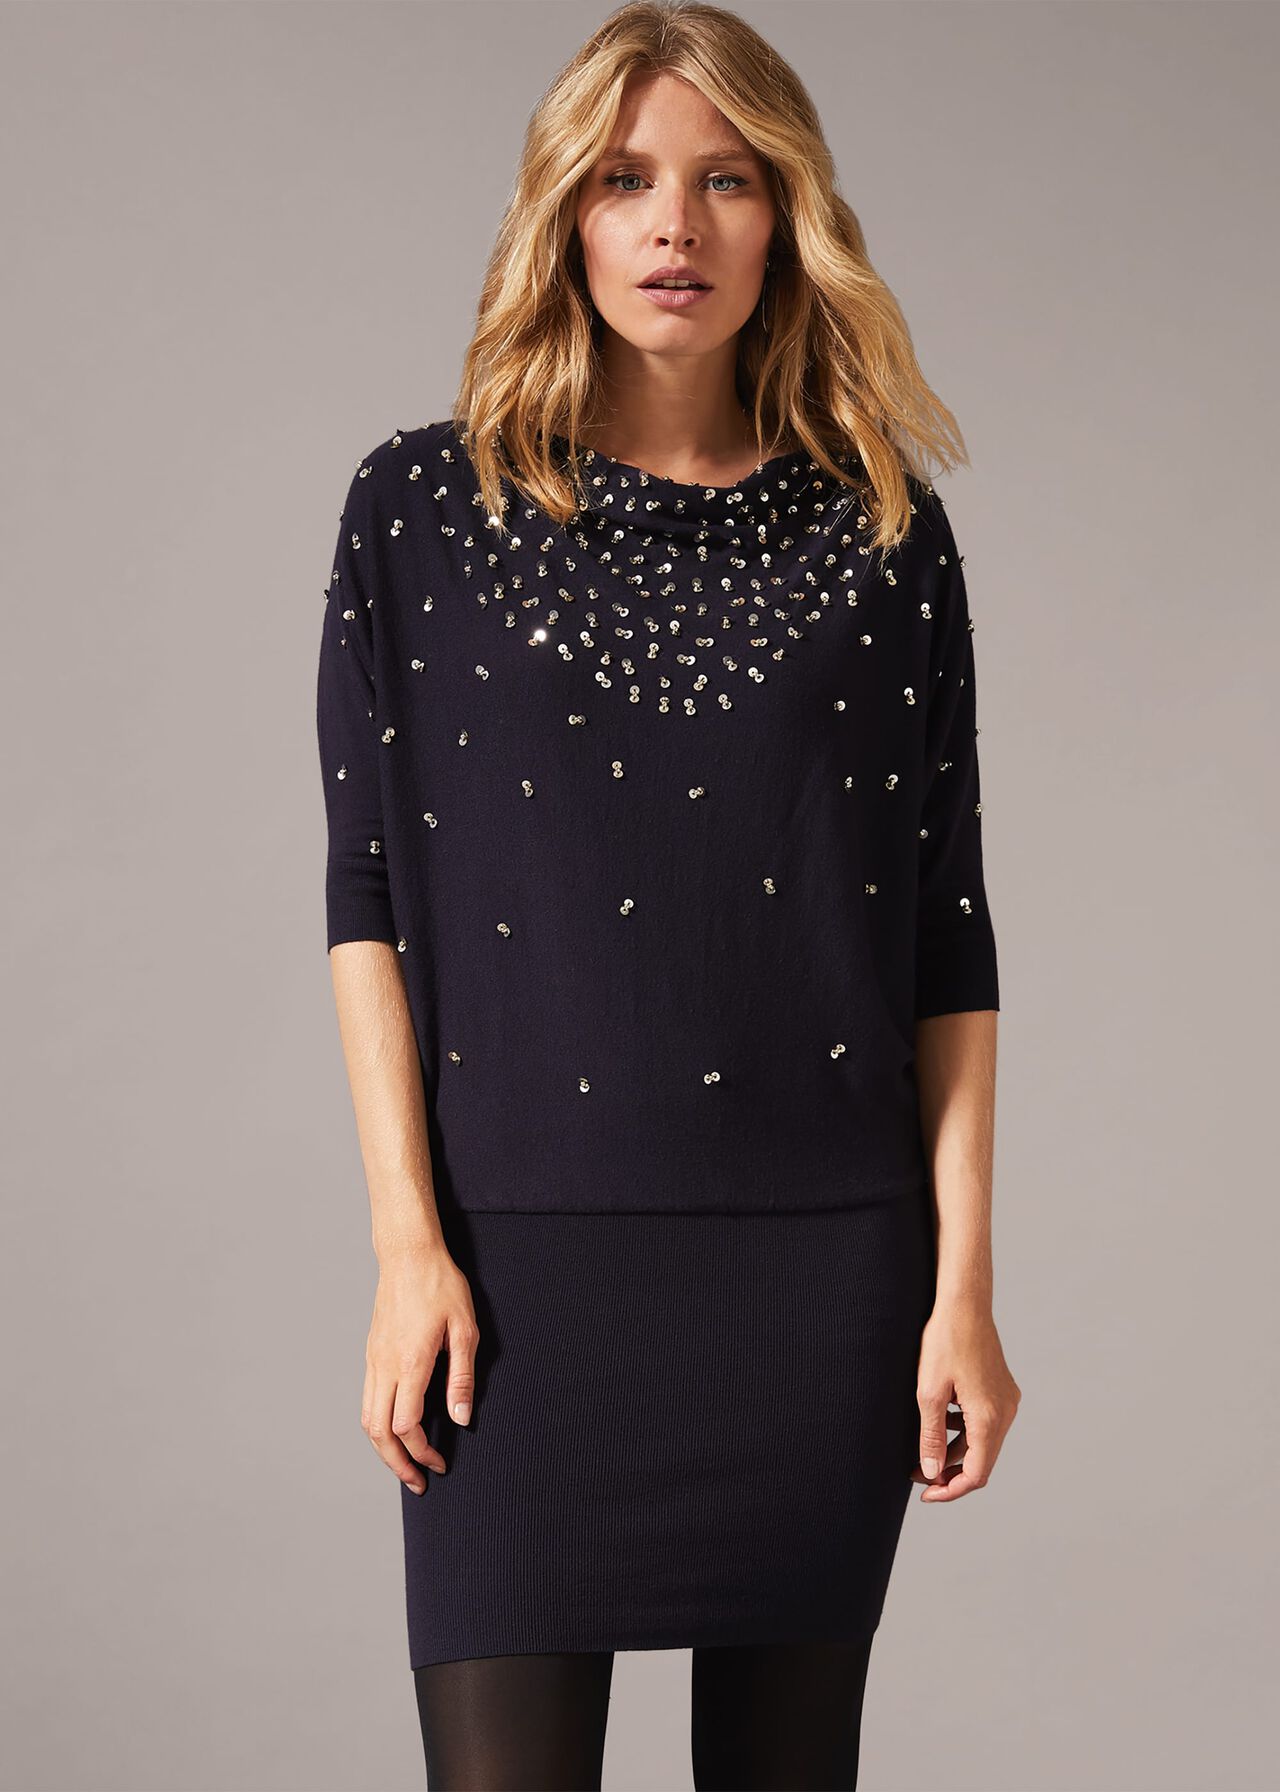 Becca Scattered Sequin Dress | Phase Eight